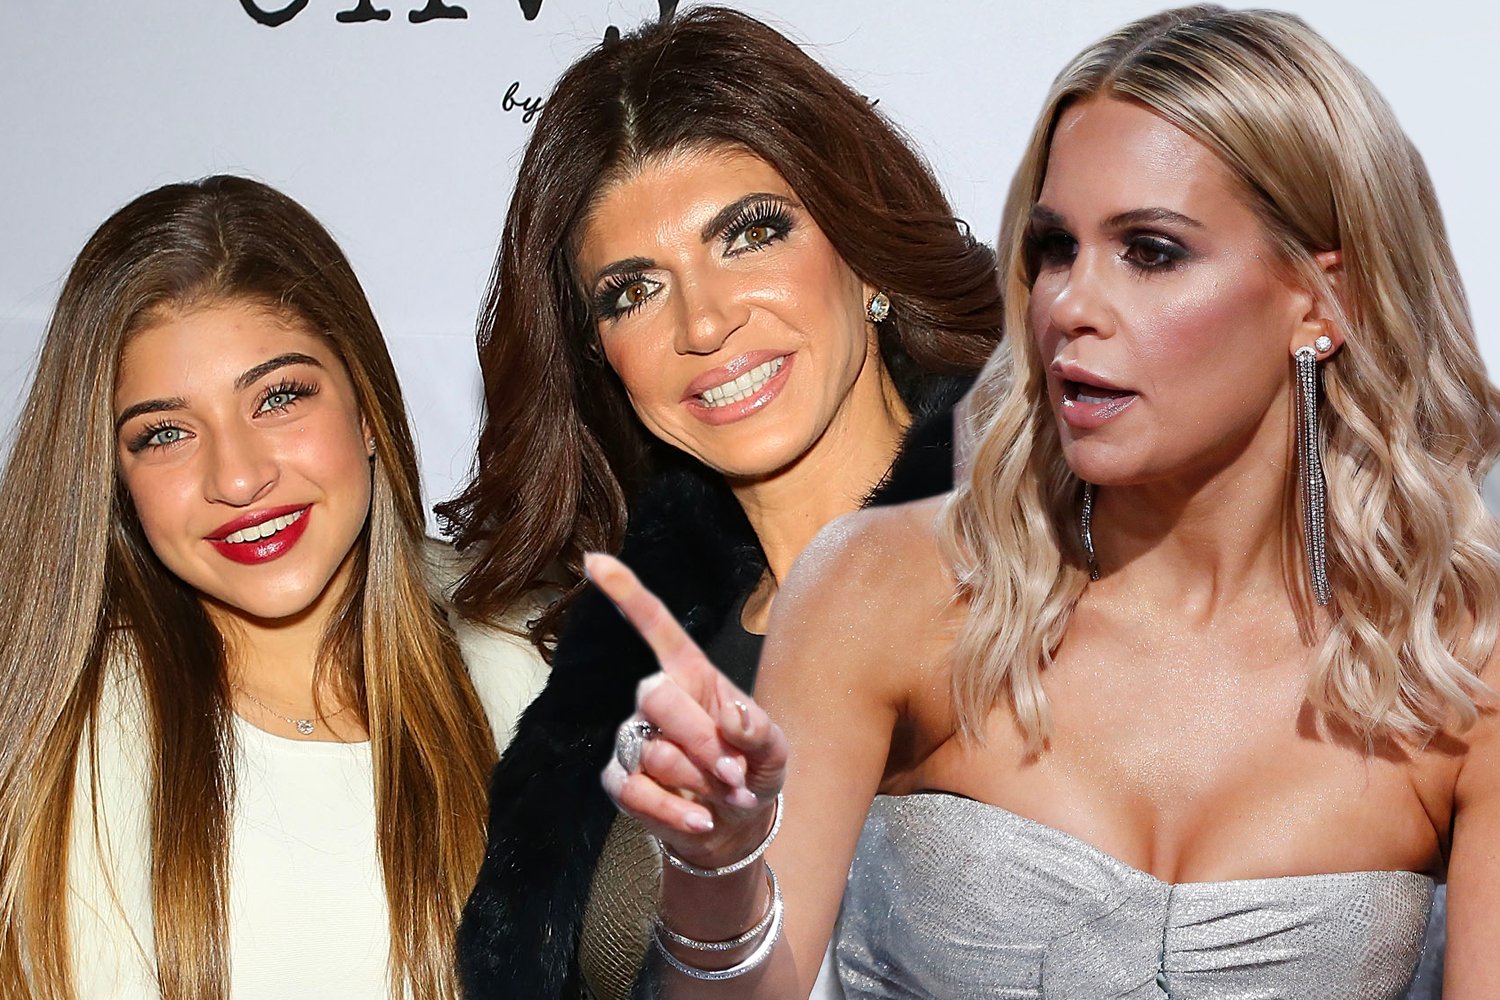 ‘RHONJ’: Jackie Goldschneider Explains Why She Didn’t Reach Out To Gia Giudice After Infamous Analogy